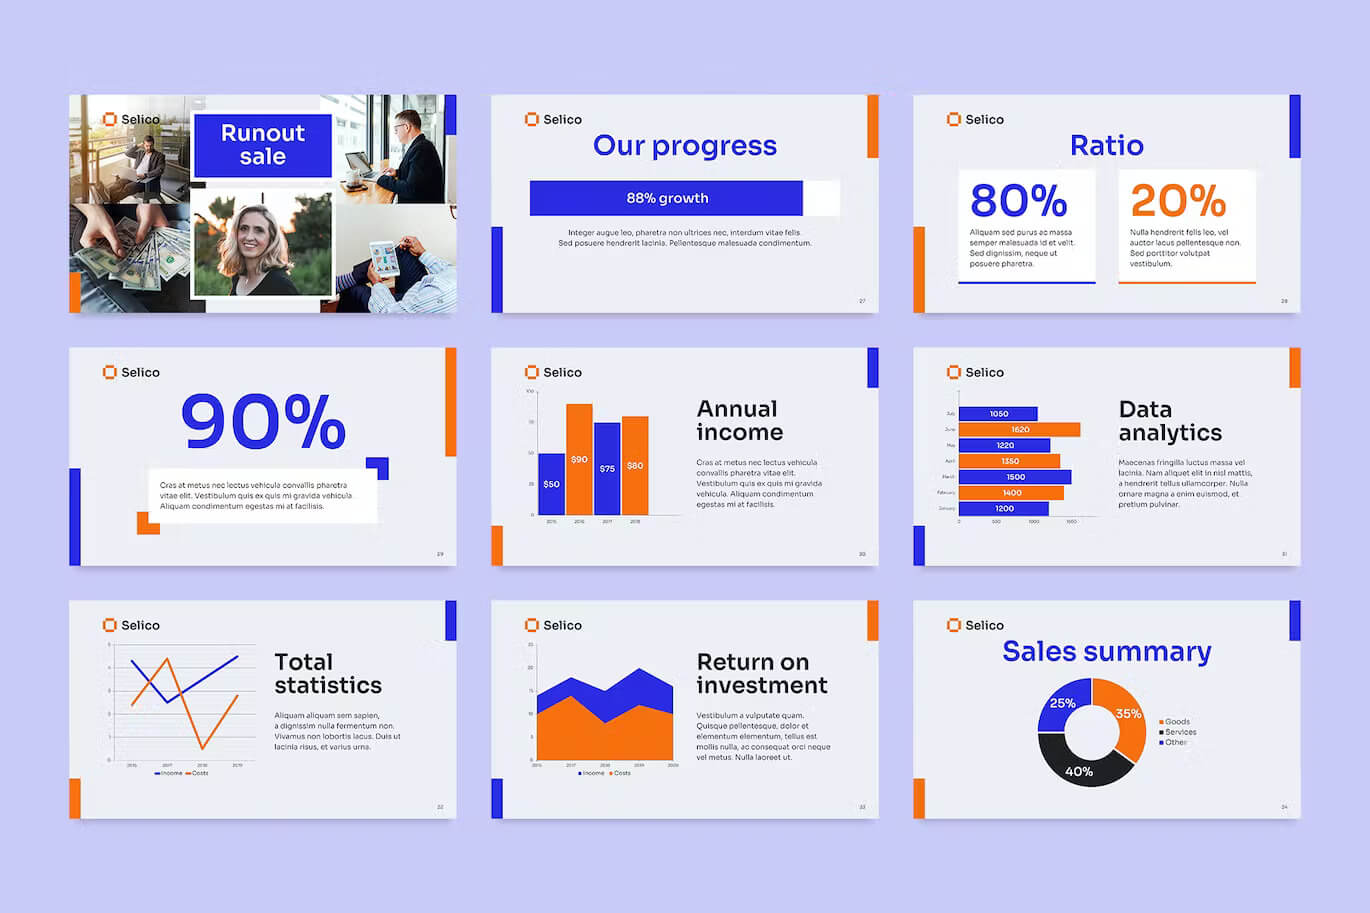 Sales summary of Business Sales PowerPoint Presentation Template.